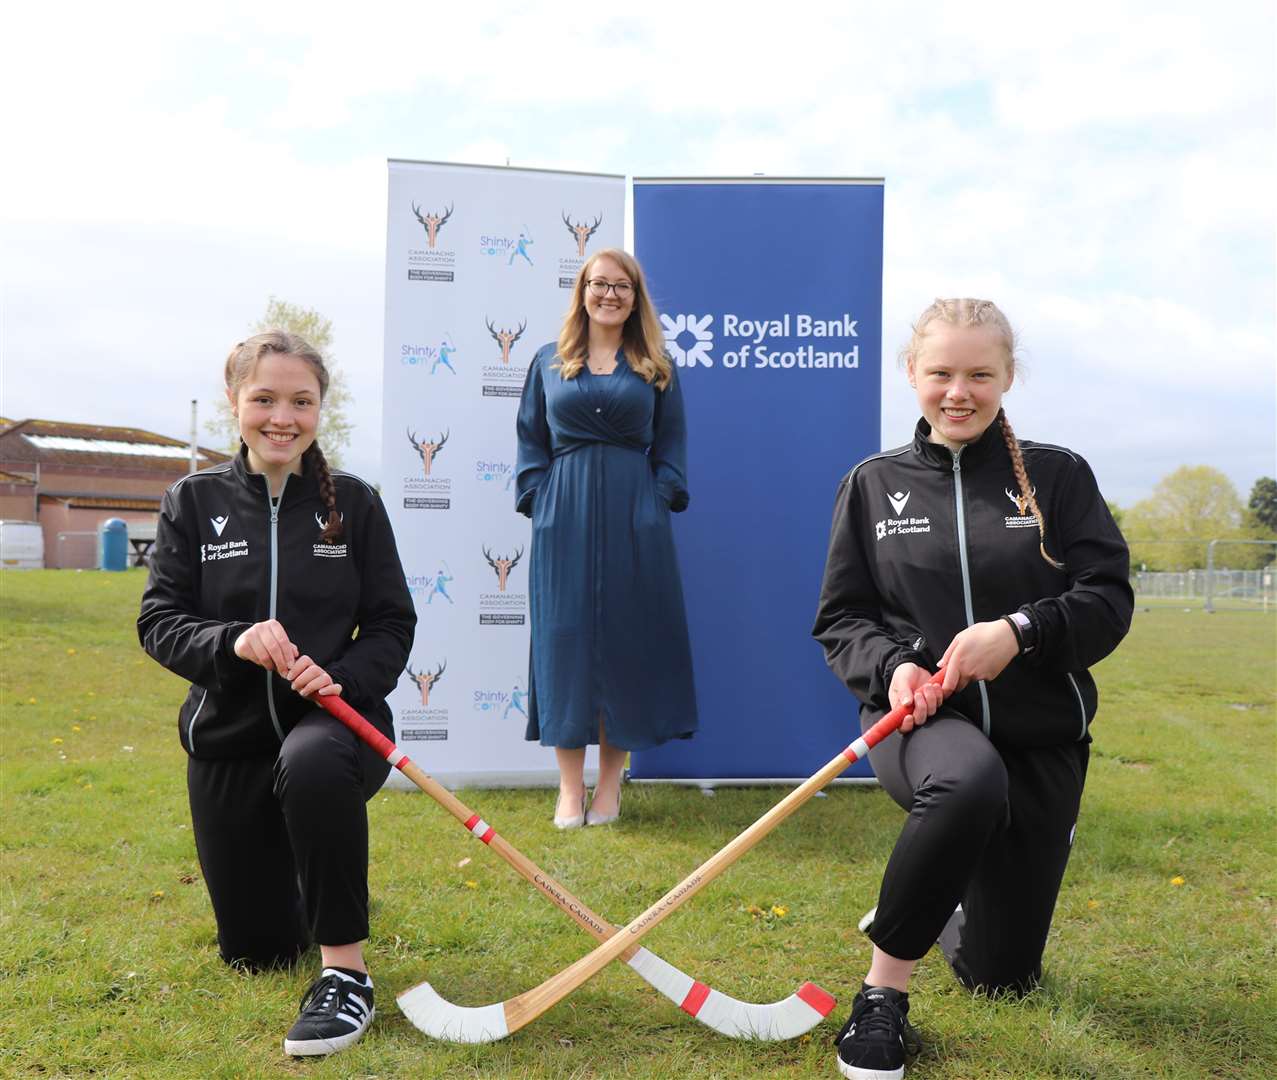 The Camanachd Association have teamed up with Royal Bank of Scotland.